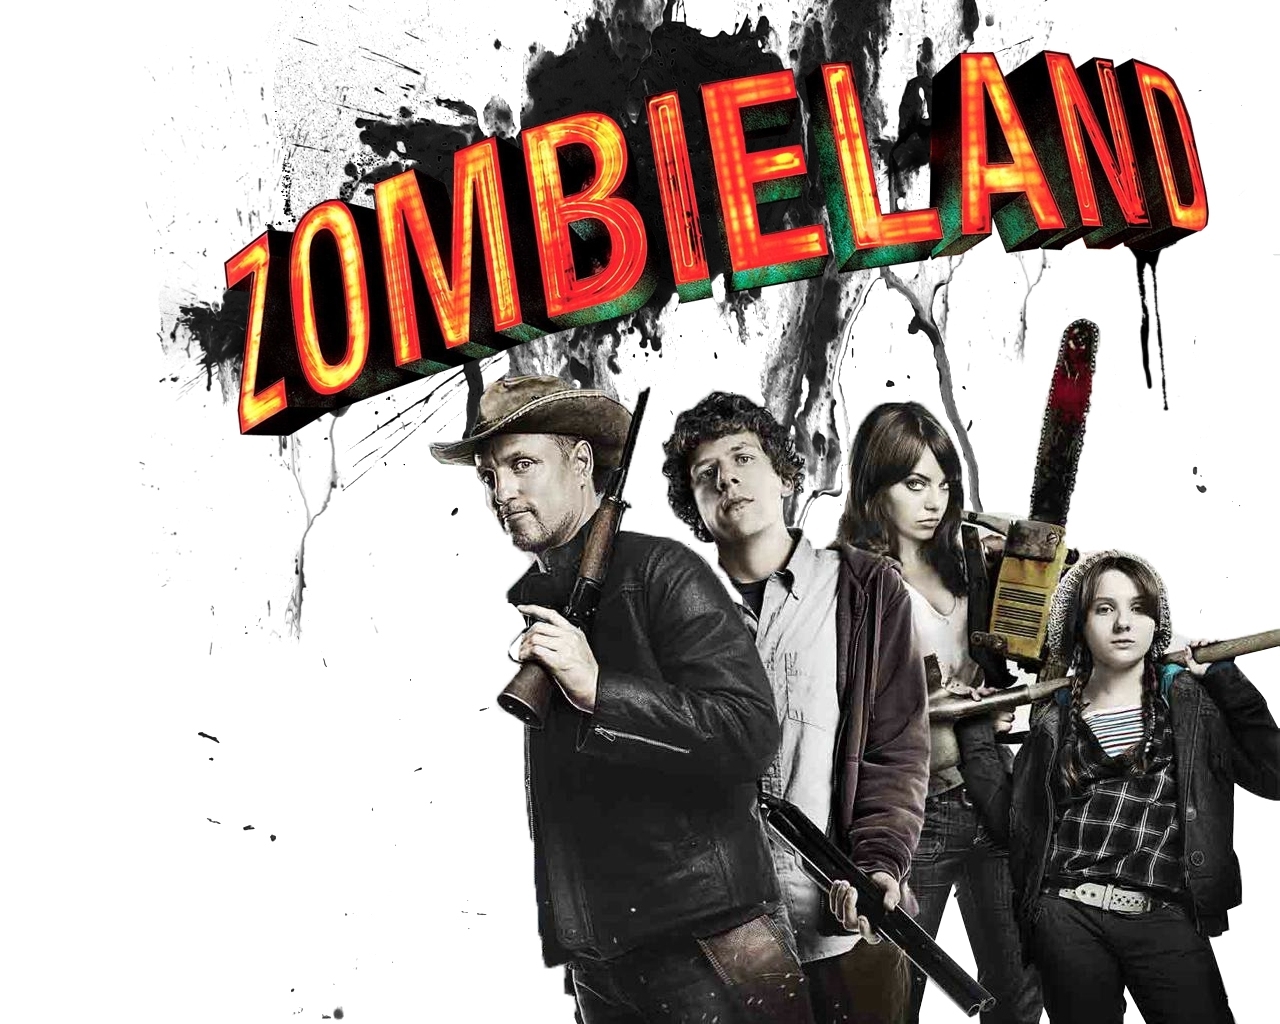 How Can Zombieland Change Your Life? - Sigma Pi Fraternity